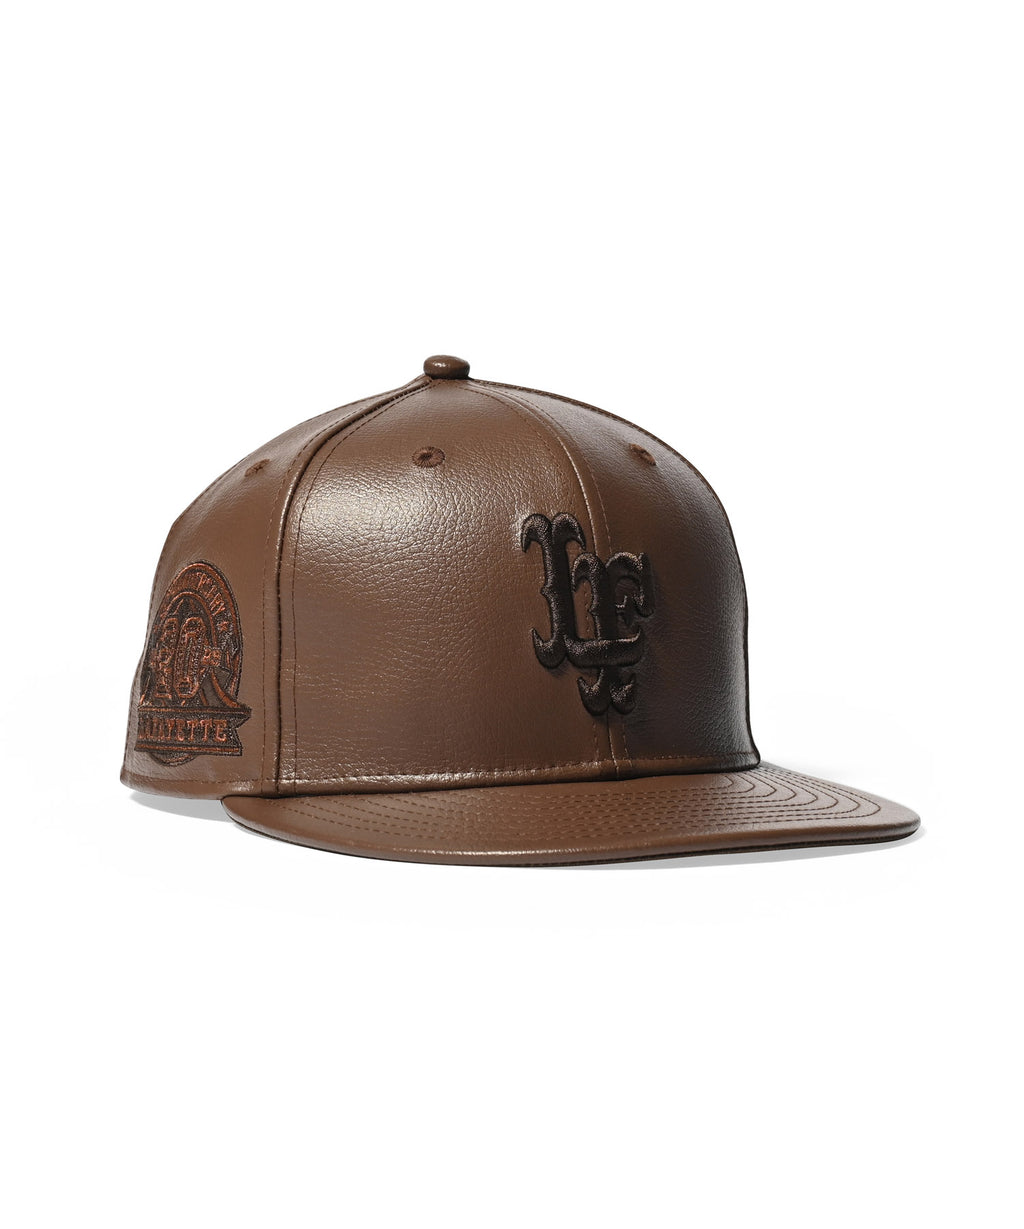 Online shopping for LFYT × NEW ERA collaboration items | LFYT 